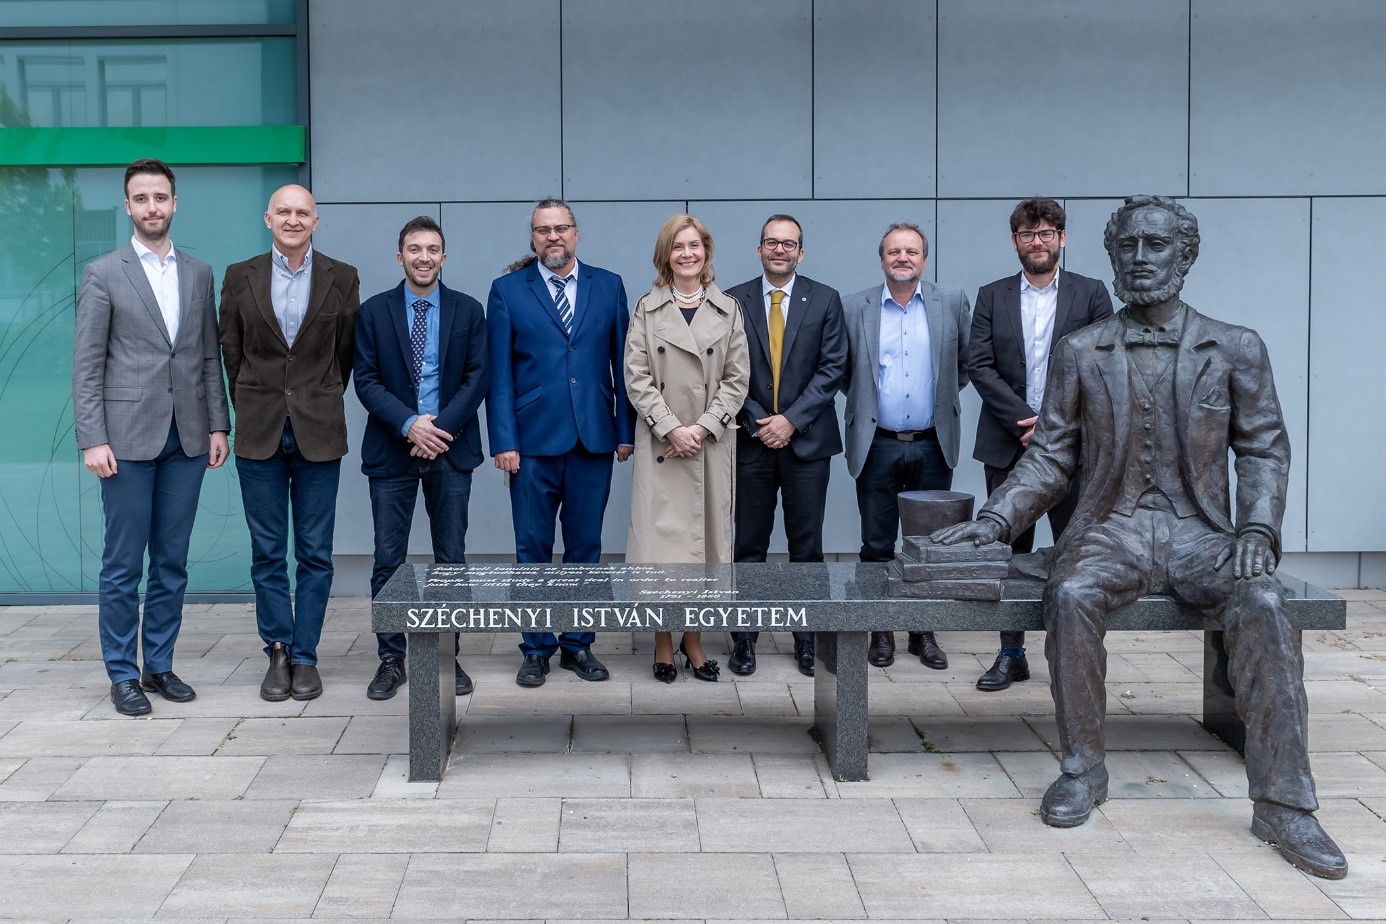 The representatives of the UNIMORE and Széchenyi universities in front of the Széchenyi-statue on the Győr Campus: Péter Németh, Scientific Secretary; Dr Csaba Tóth-Nagy, associate professor; Prof. Davide Barater (MUNER); Prof. Dr Gábor Dogossy, Dean of faculty; Dr Eszter Lukács, Vice-President; Prof. Francesco Leali (MUNER-UNIMORE); Dr Dénes Fodor, Vice-Dean and Prof. Matteo Giacoponi (MUNER).